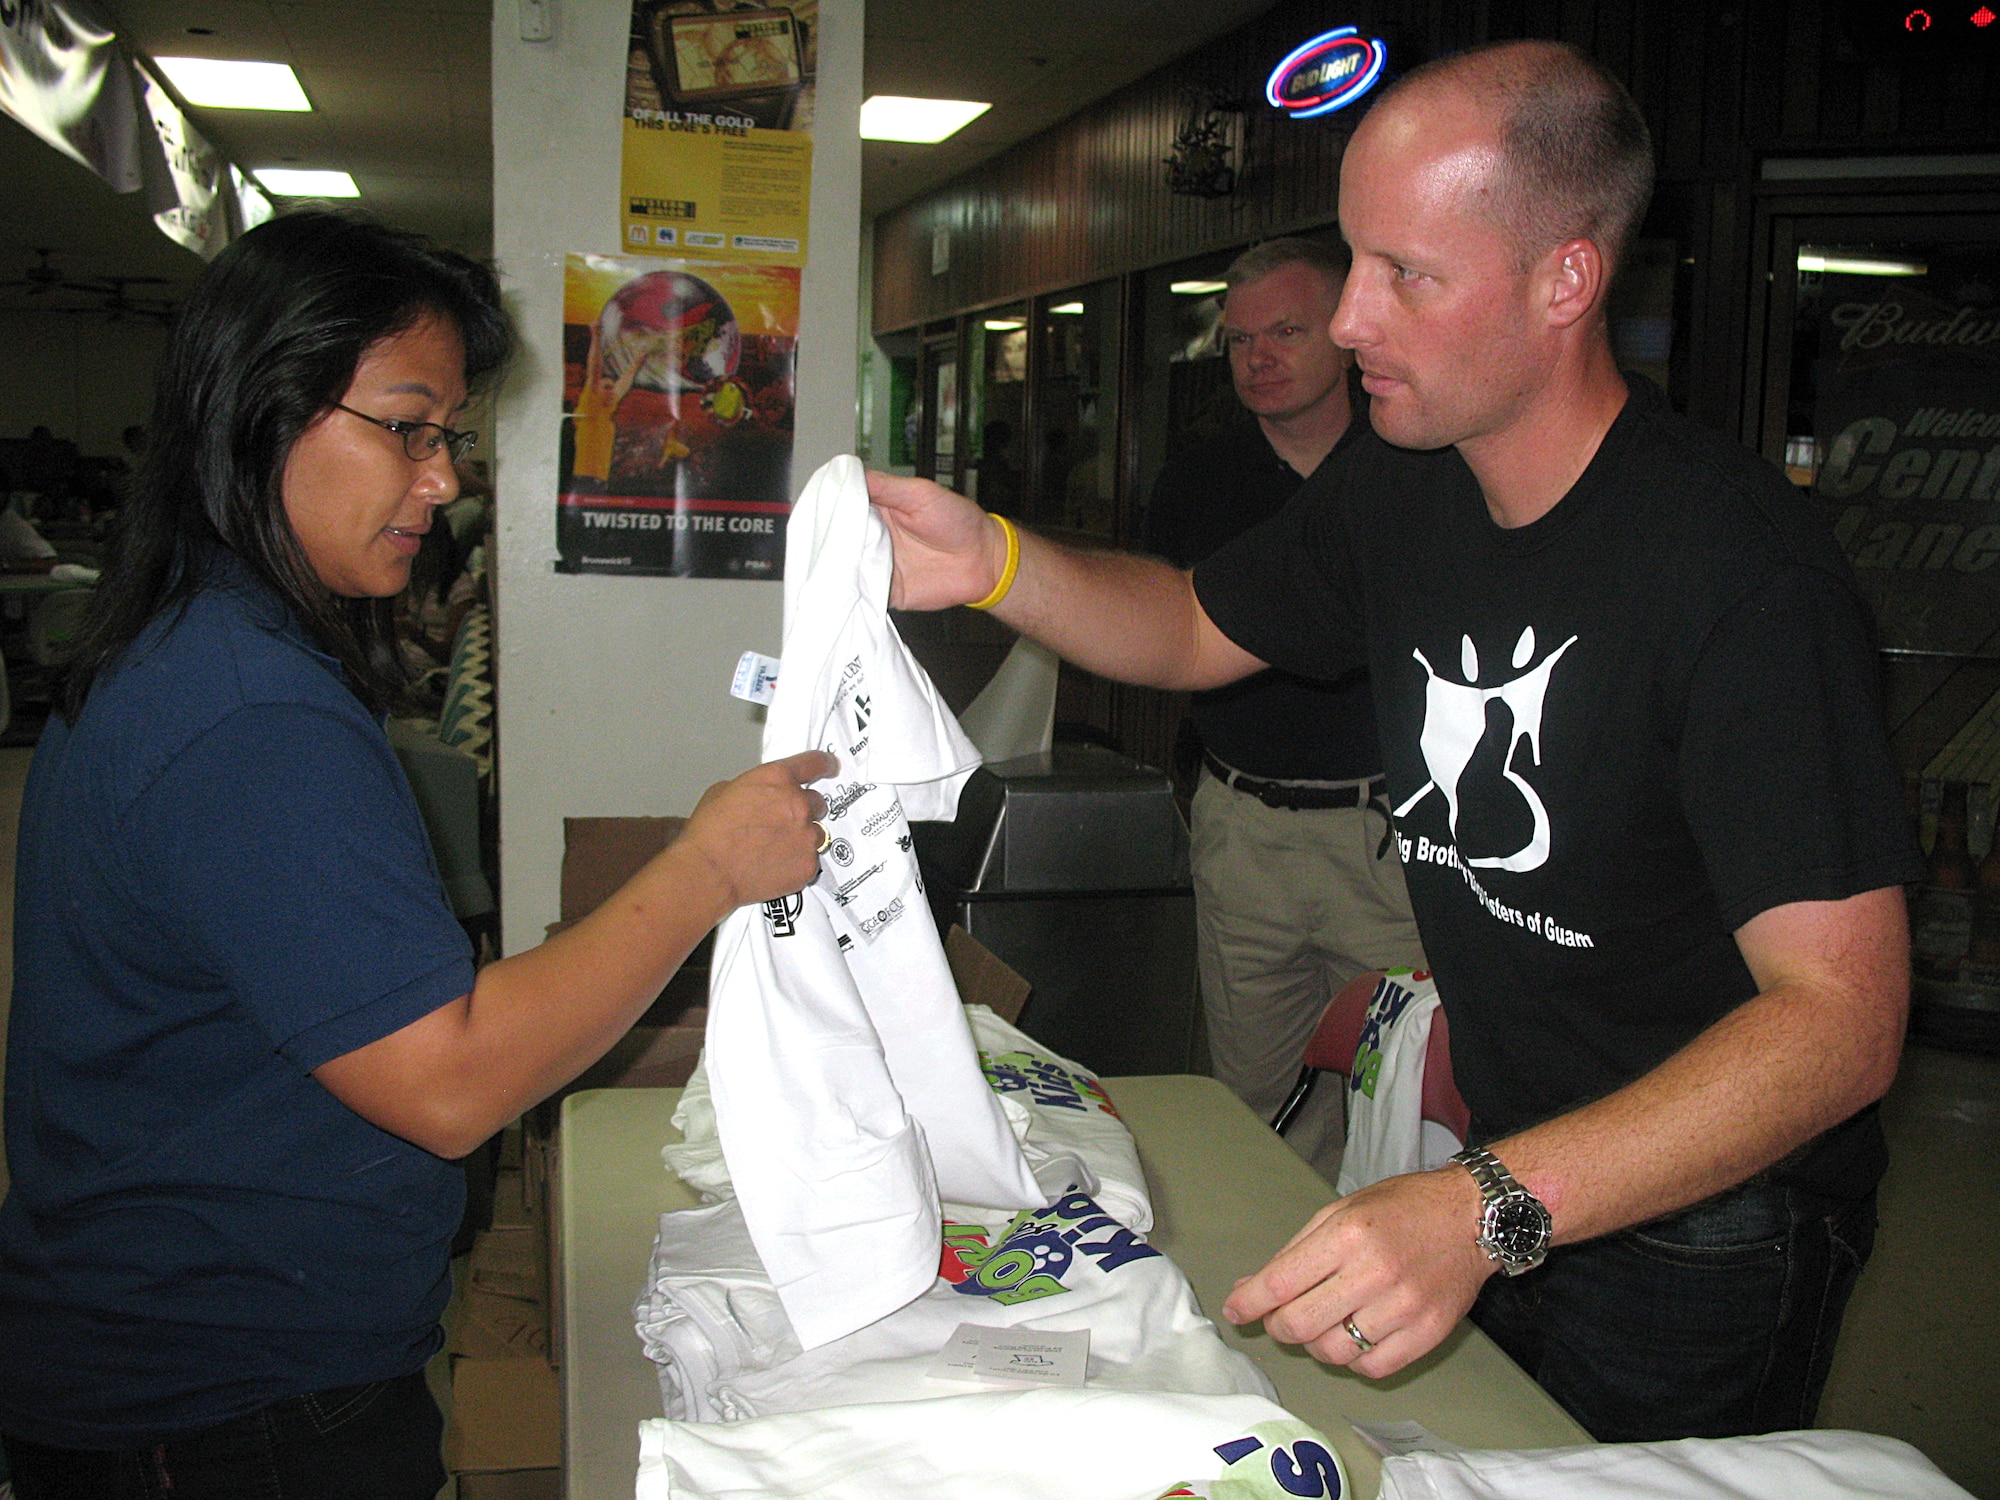 ANDERSEN AIR FORCE BASE, Guam -- Maj. Jeffrey Holt, 36th Logistics Readiness Squadron commander, hands an event t-shirt to local and event participant Rose SanNicholas at the Big Brothers and Big Sisters of Guam's 'Bowl for kids' sake' fundaraiser Nov. 22. (U.S. Air Force photo by Airman 1st Class Carissa Wolff)